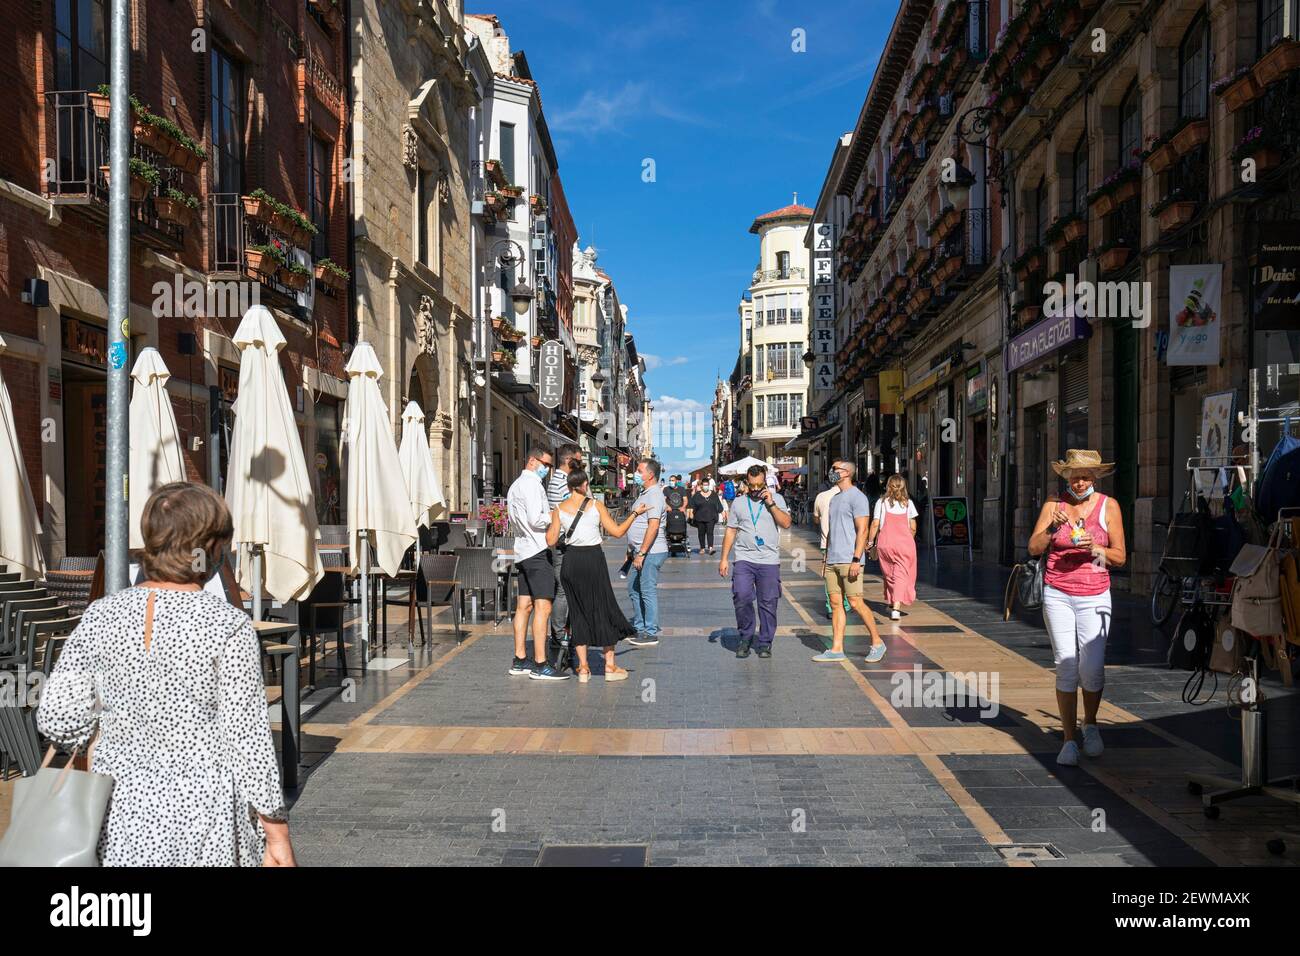 Europe, Spain, Leon, Shops and traditional architecture on Calle Ancha with tourists wearing masks during Covid-19 Pandemic Summer 2020. Stock Photo